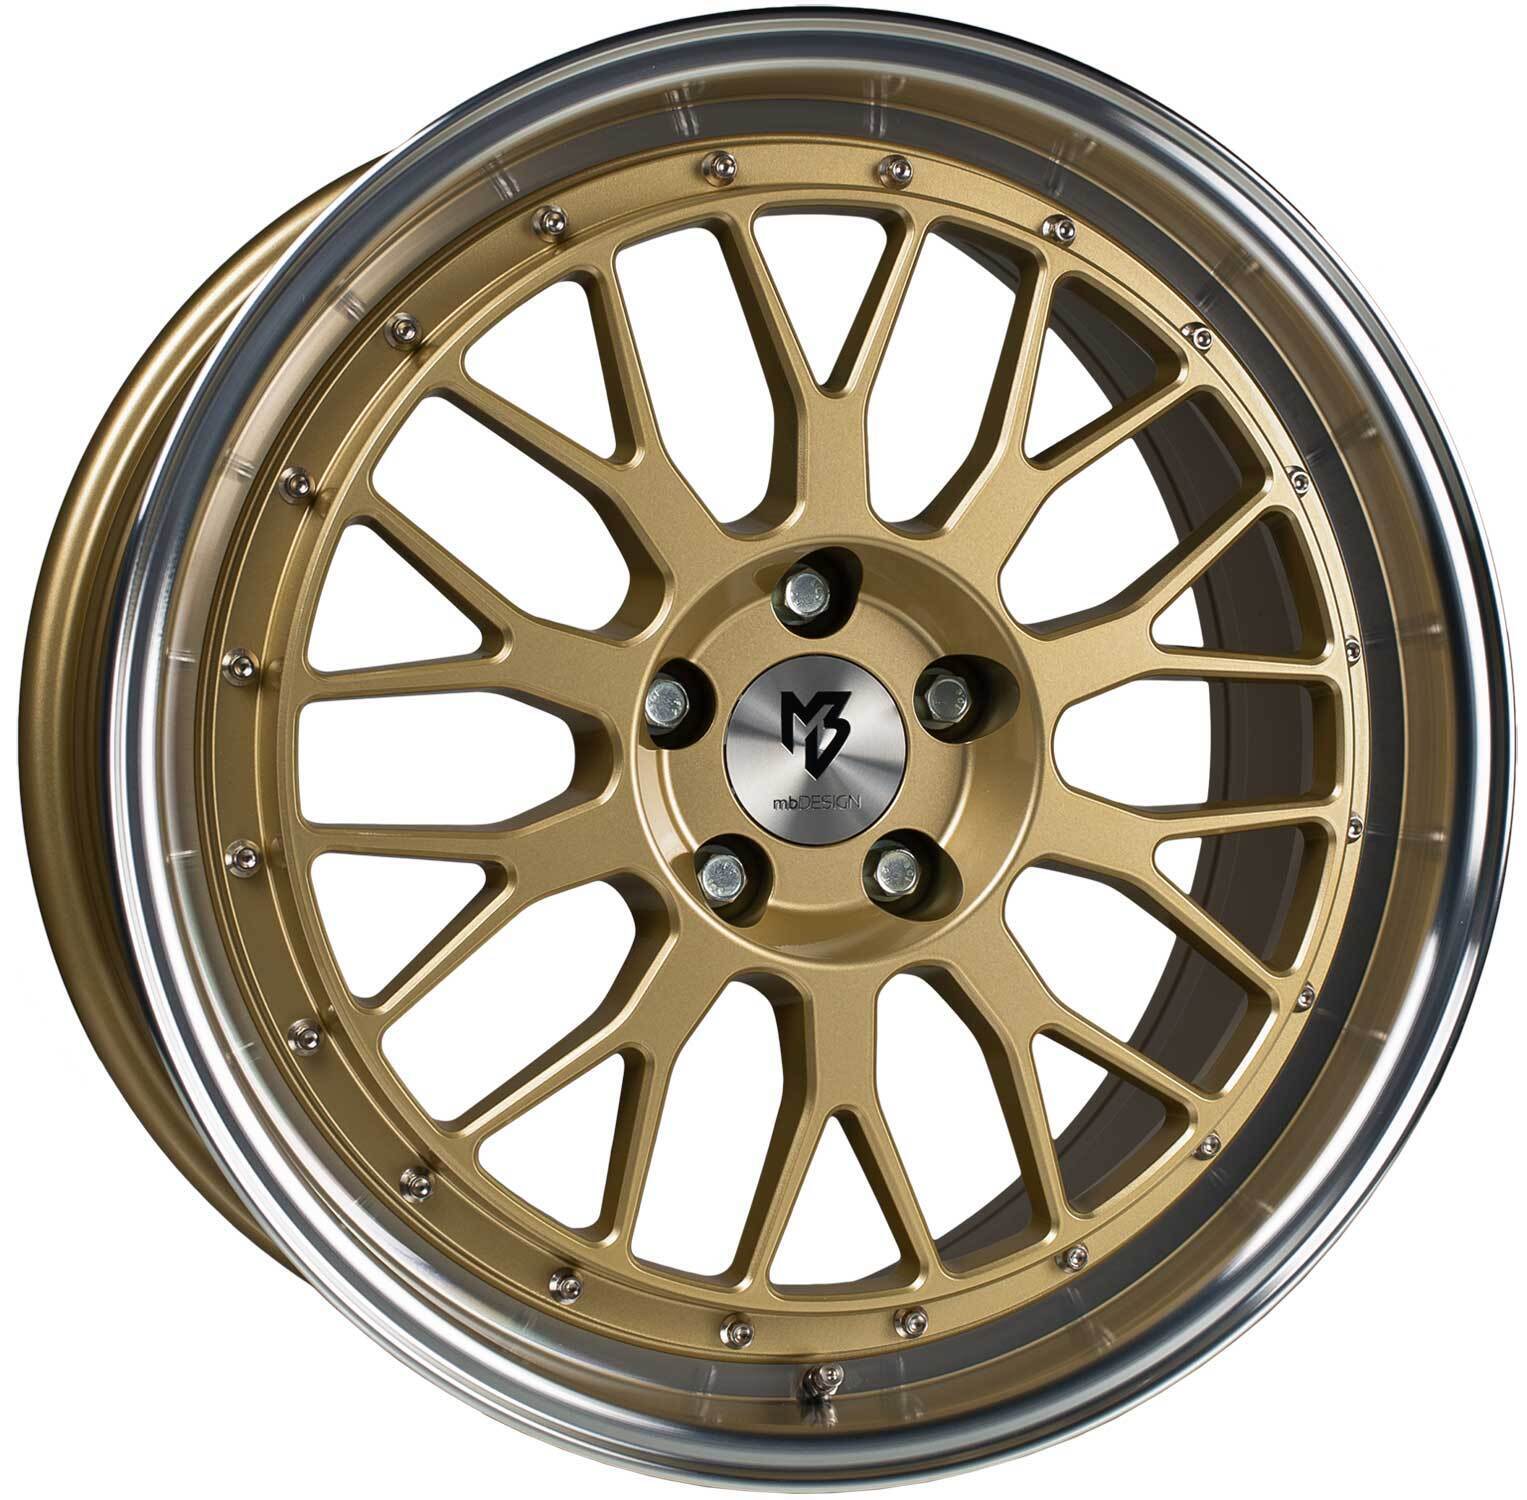 MB Design Rims LV1 8.5Jx20 ET45 5x108 GOLD POLISHED for Ford C-Max Focus Galaxy